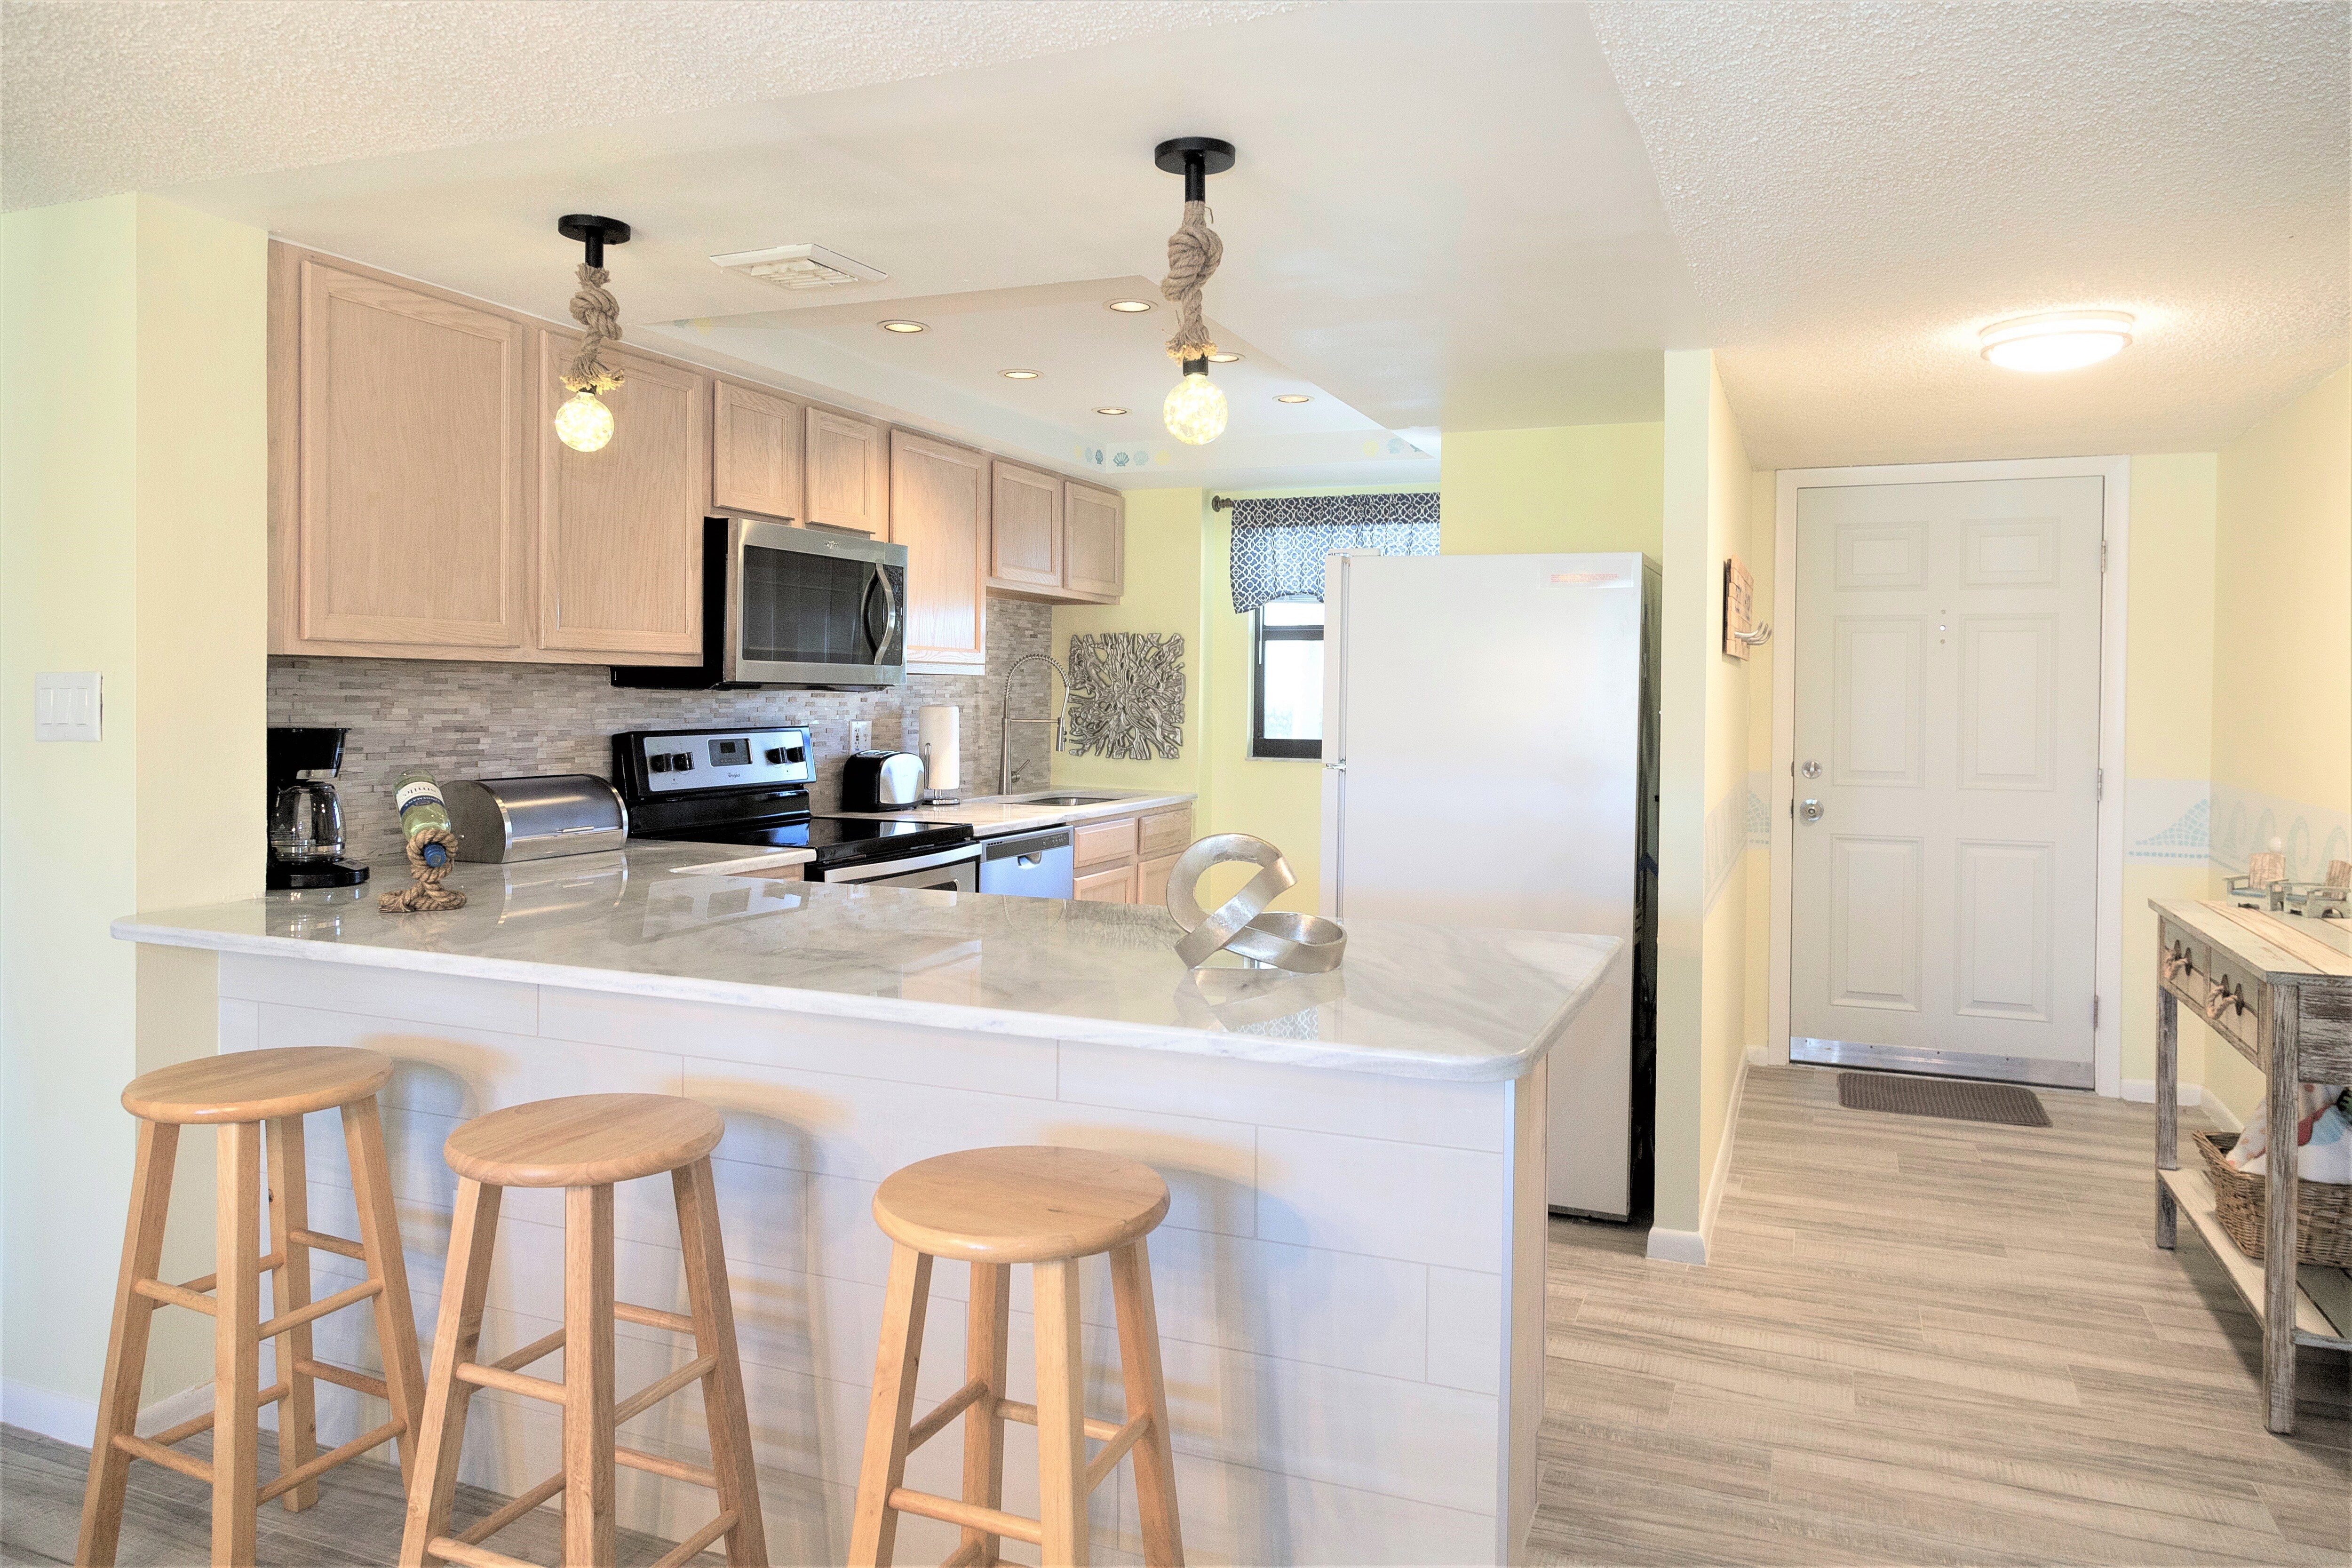 Fully equipped and spacious kitchen with granite countertops